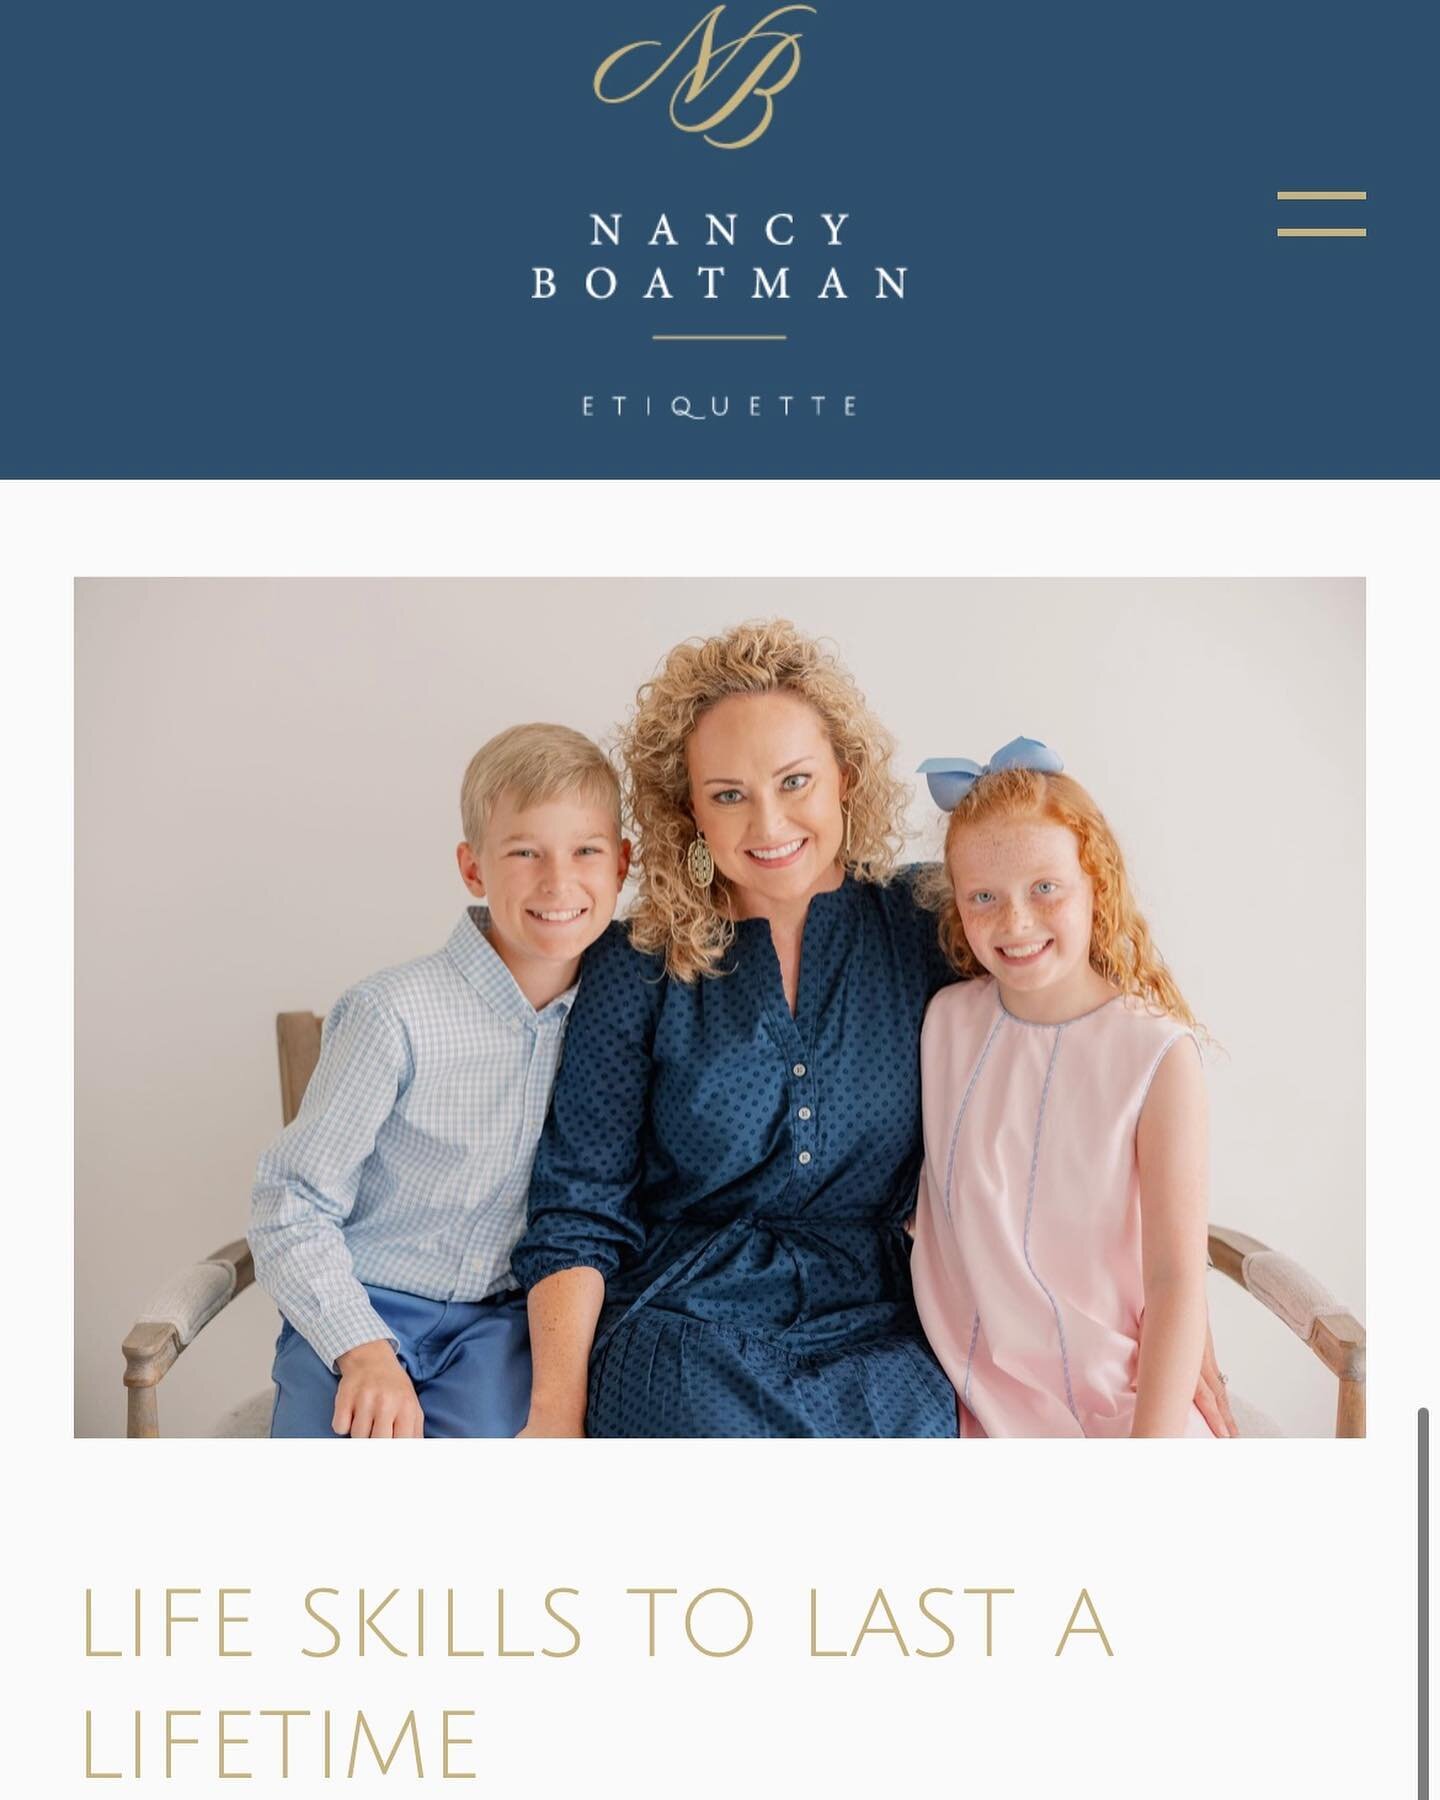 UPDATED WEBSITE

So excited to share that after many months of work, my website is refreshed and accurately informs viewers of my etiquette services. Simply visit: nancyboatmanetiquette.com

It was a joy to work with @malicotecreativeco and their fab